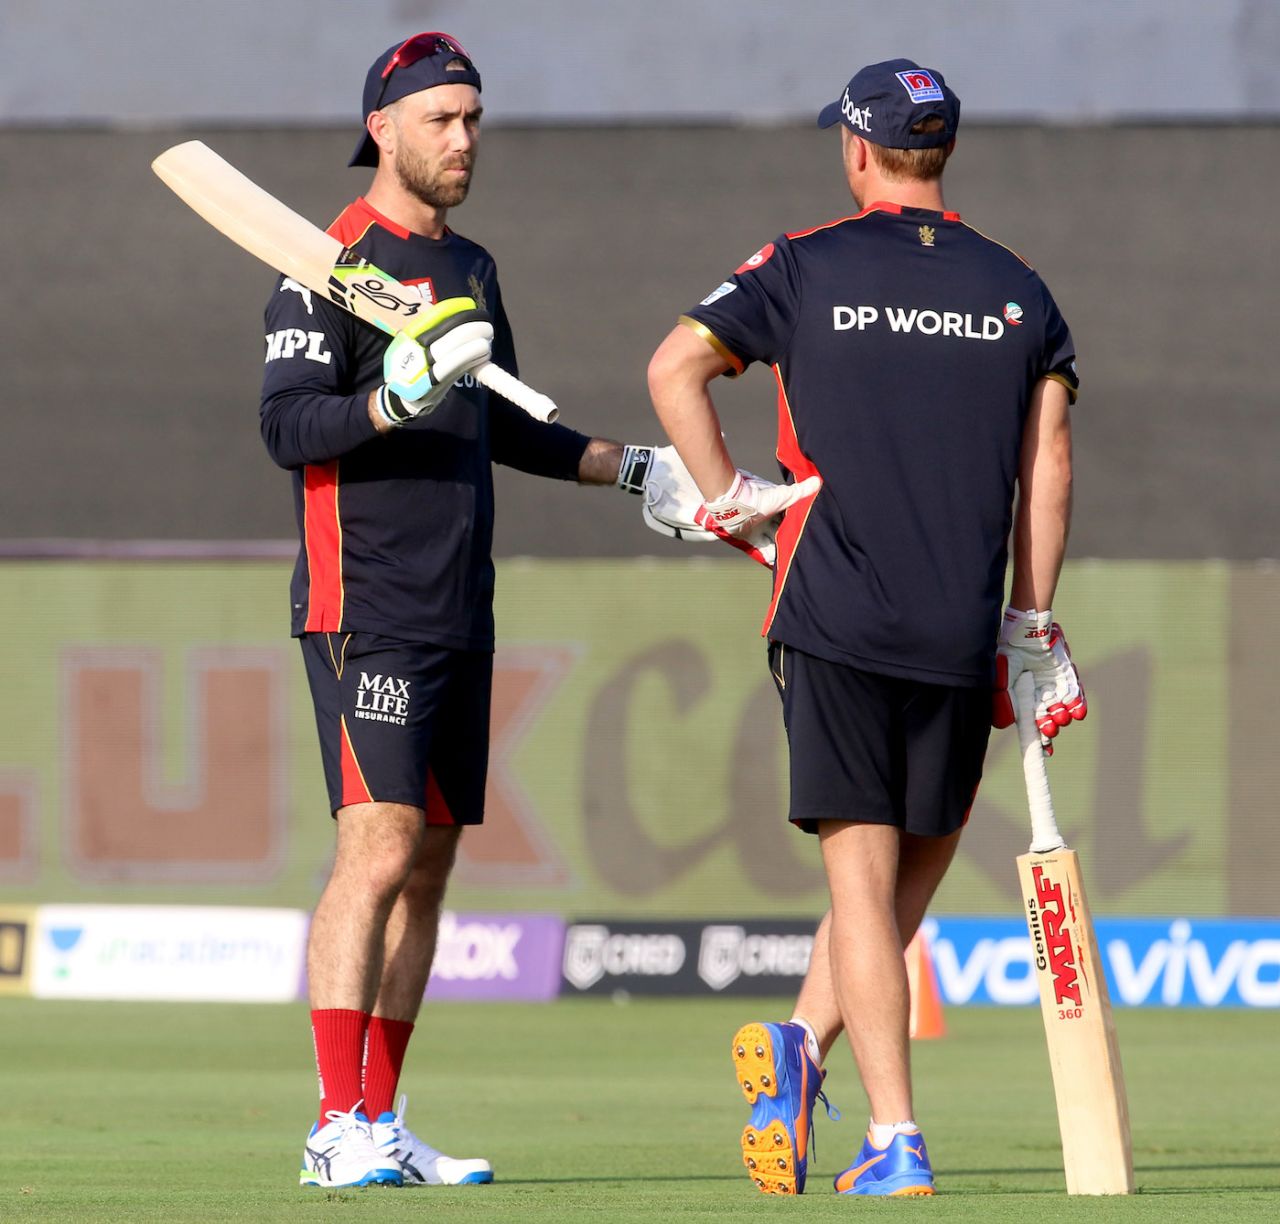 Glenn Maxwell and AB de Villiers have a chat before the game, Kolkata Knight Riders vs Royal Challengers Bangalore, IPL 2021, Abu Dhabi, September 20, 2021